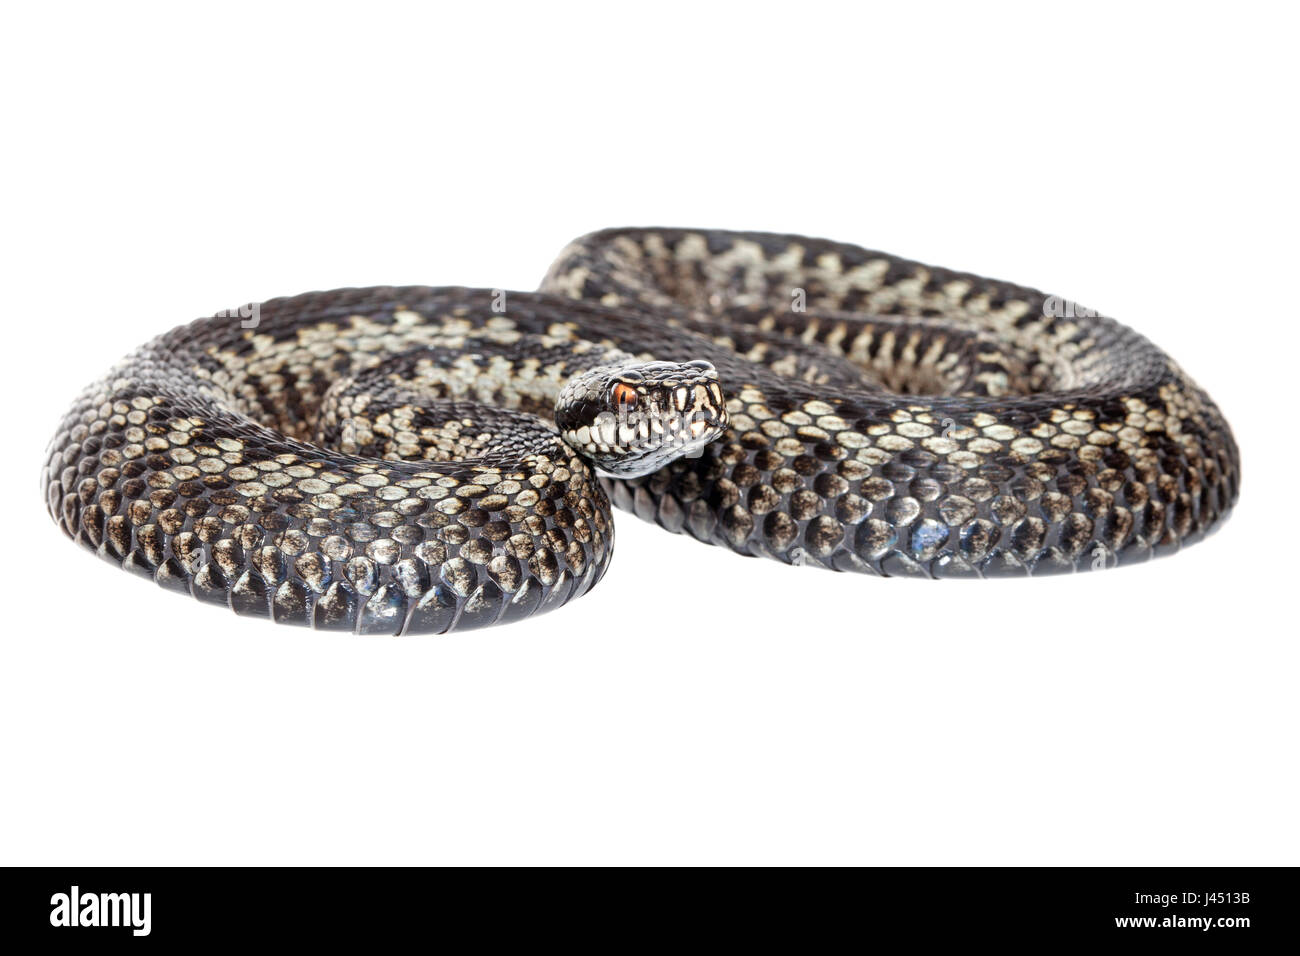 photo of a male common viper against a white background Stock Photo